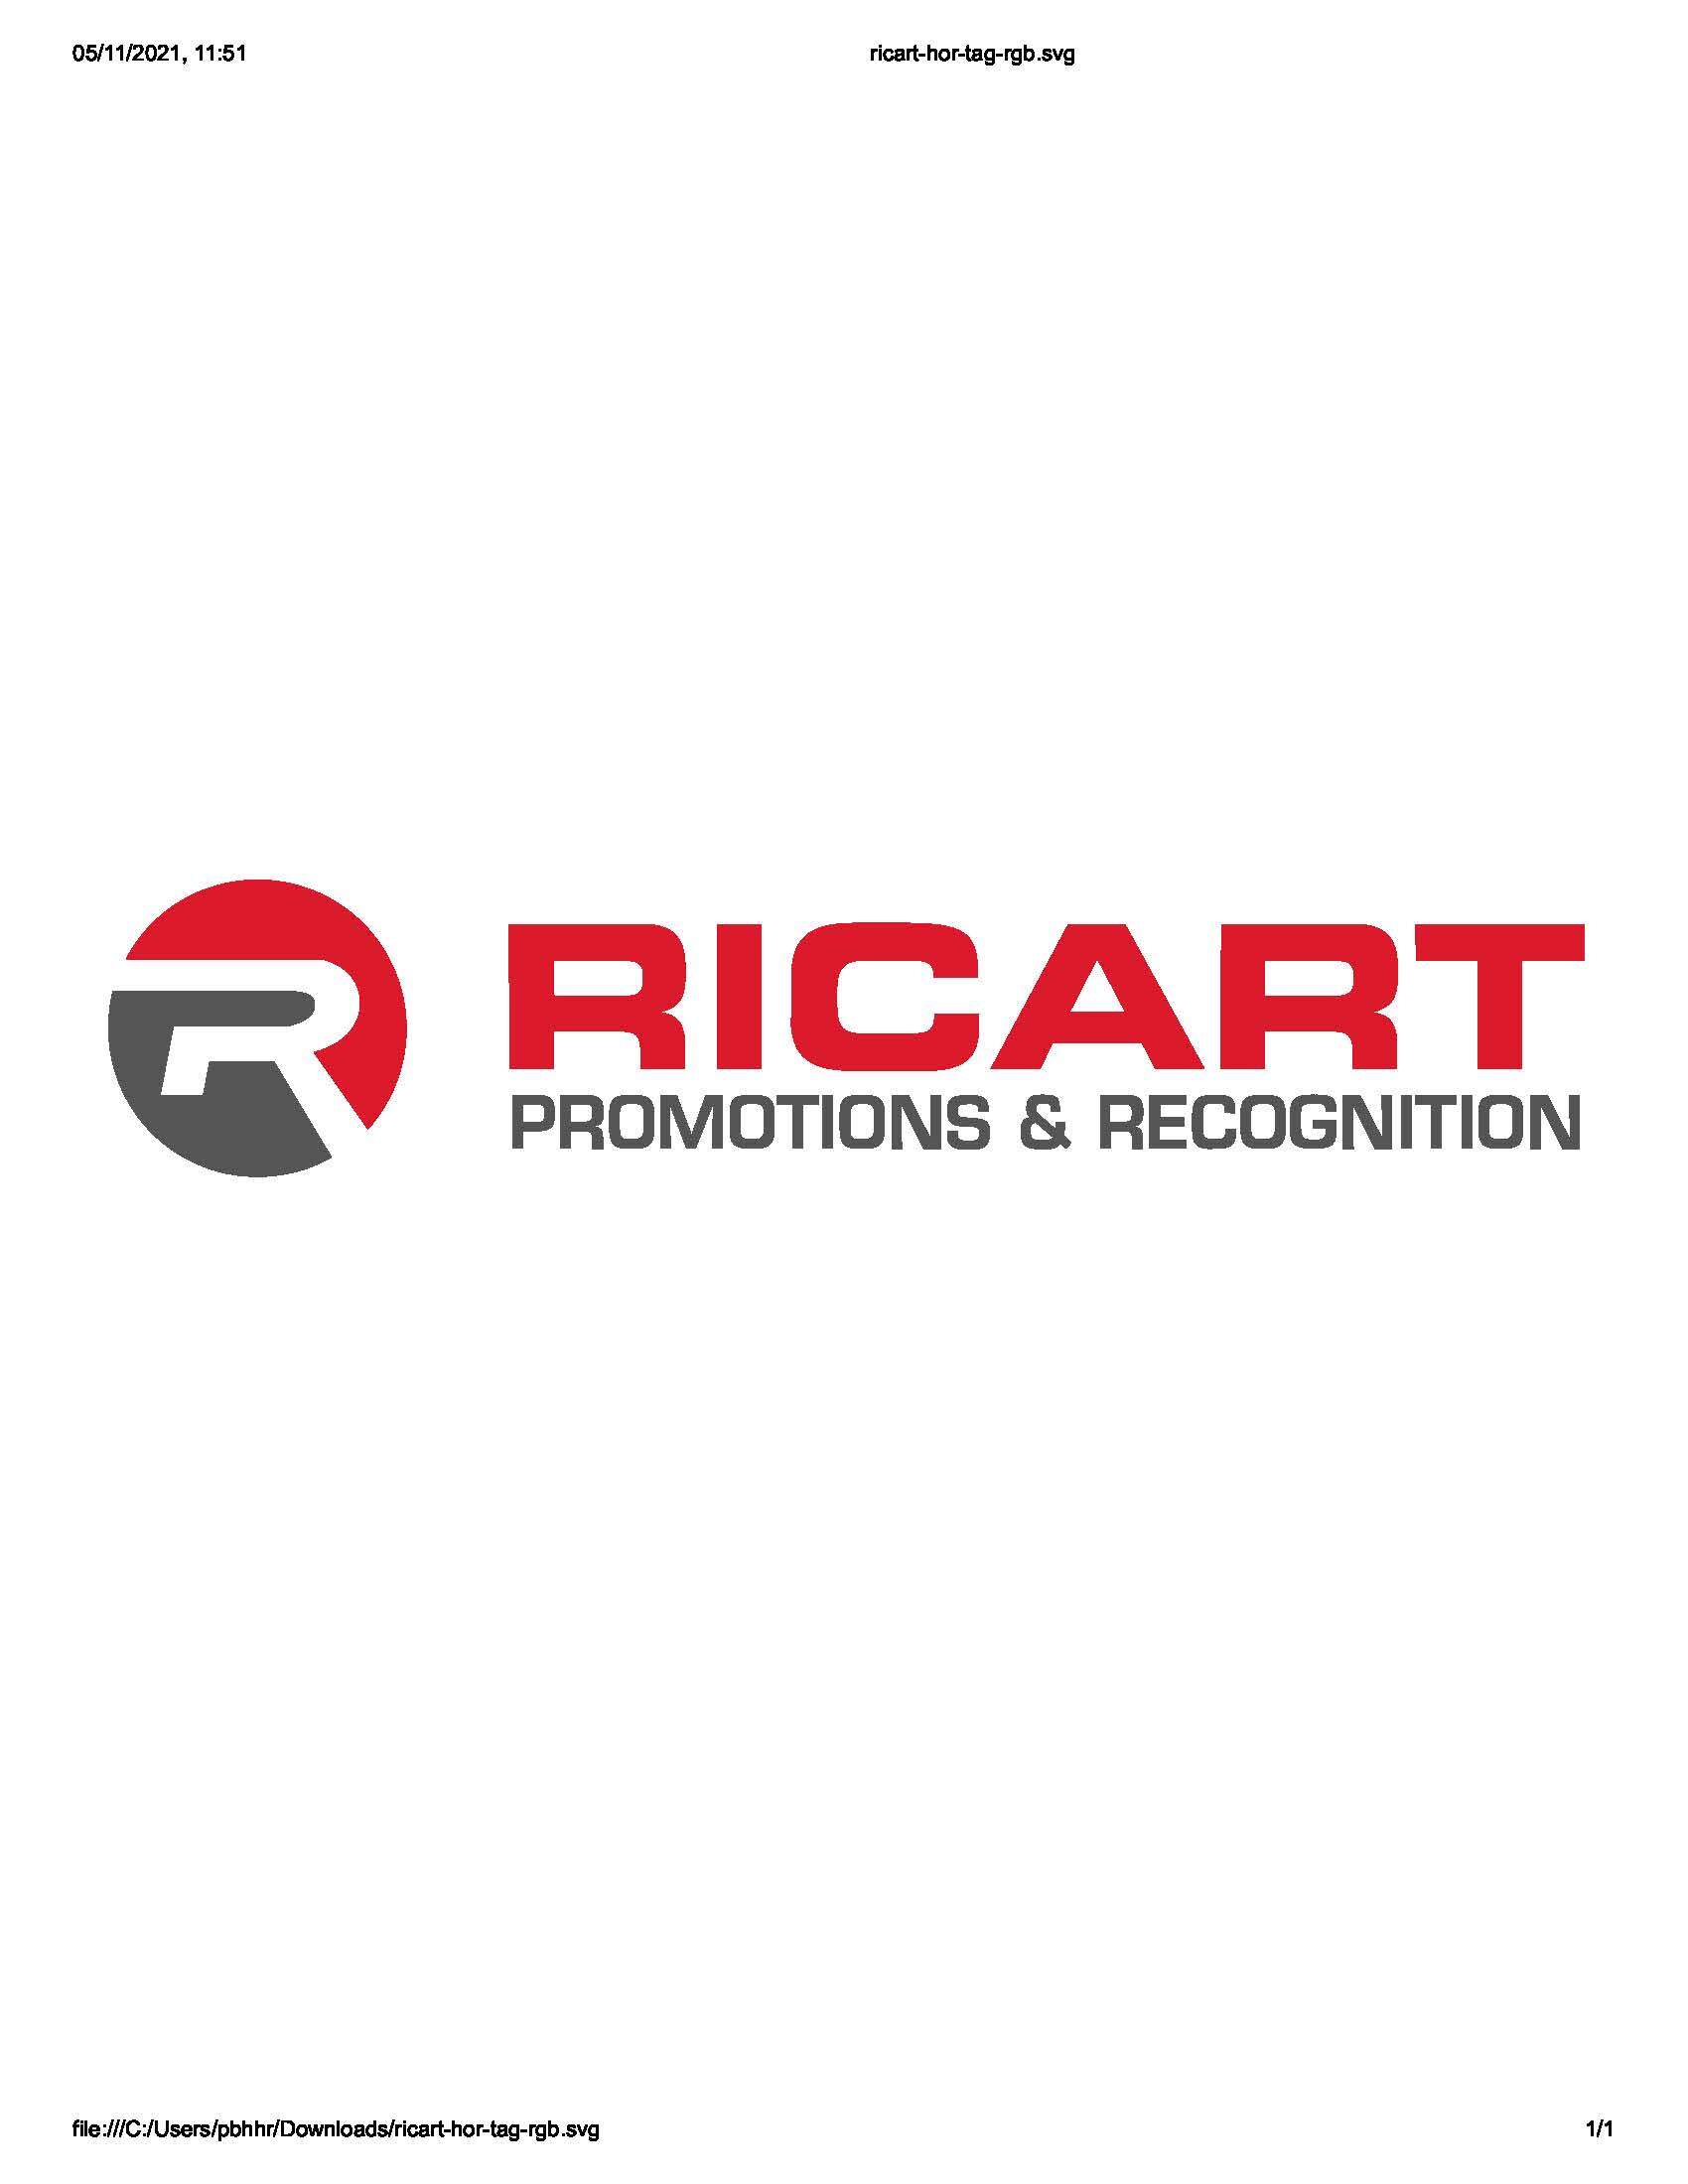 Ricart Promotions and Recognition